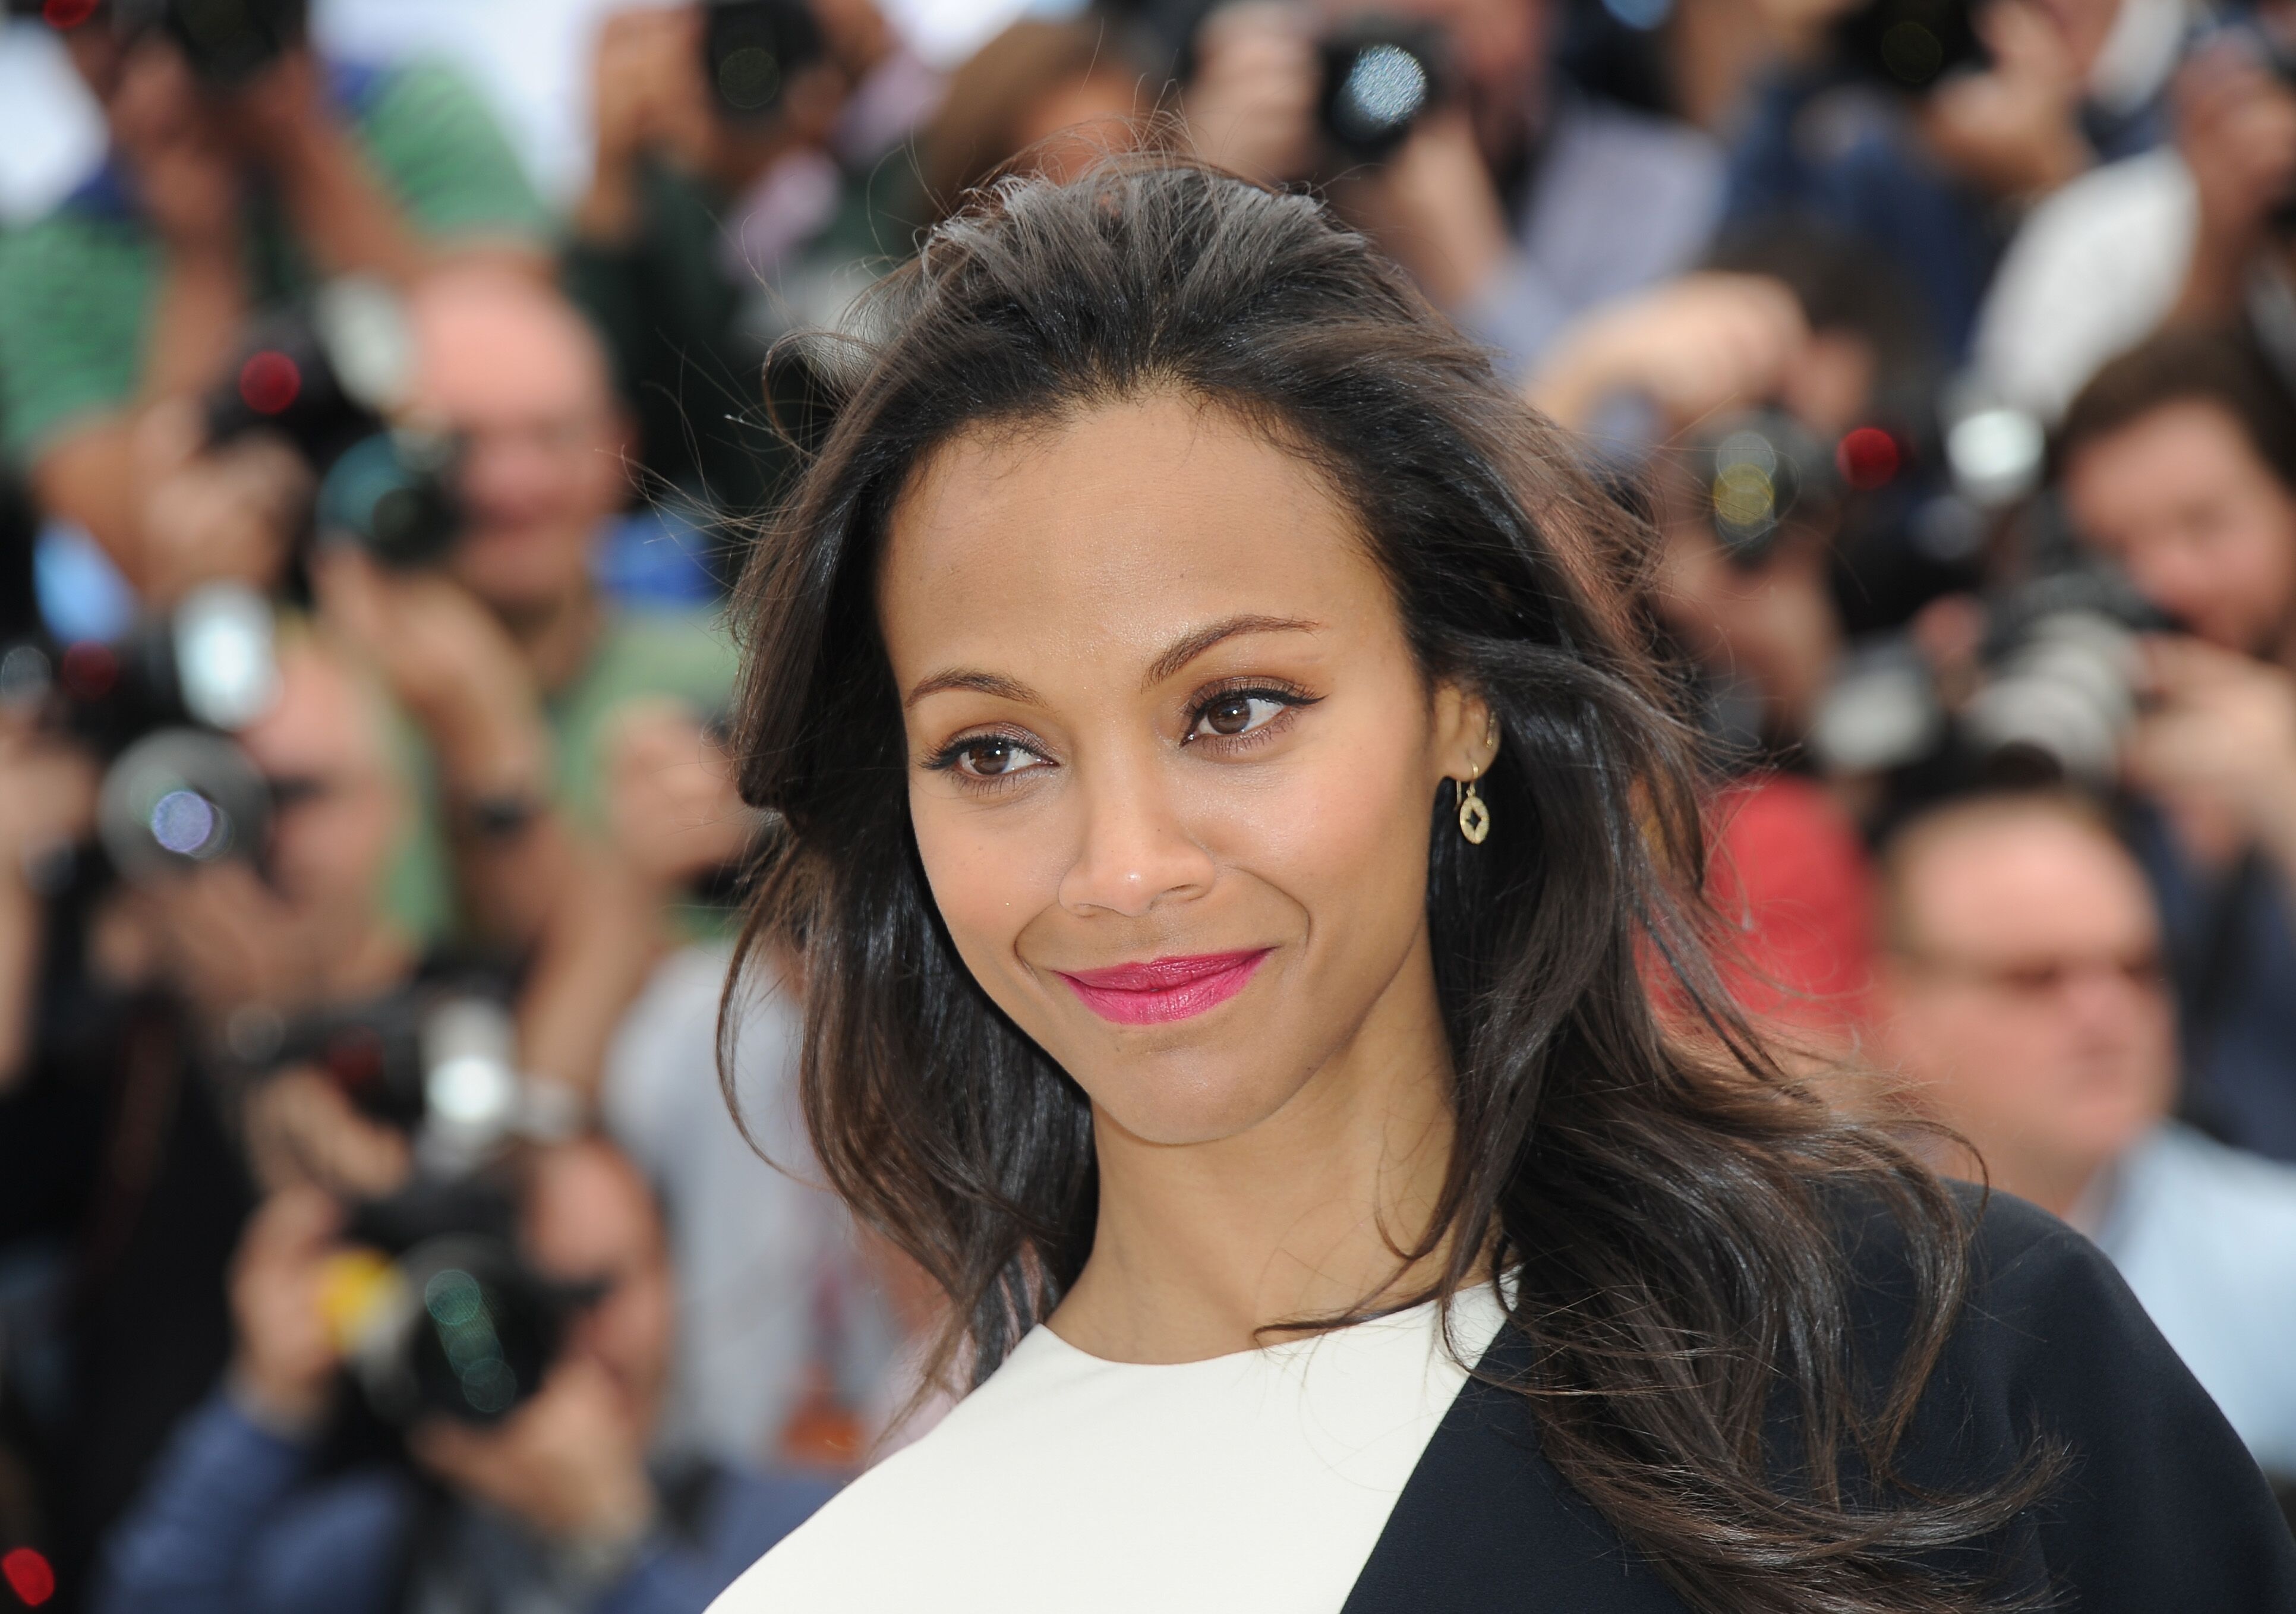 Zoe Saldana attends the photocall for 'Blood Ties' at The 66th Annual Cannes Film Festival on May 20, 2013 in Cannes, France | Photo: Getty Images 